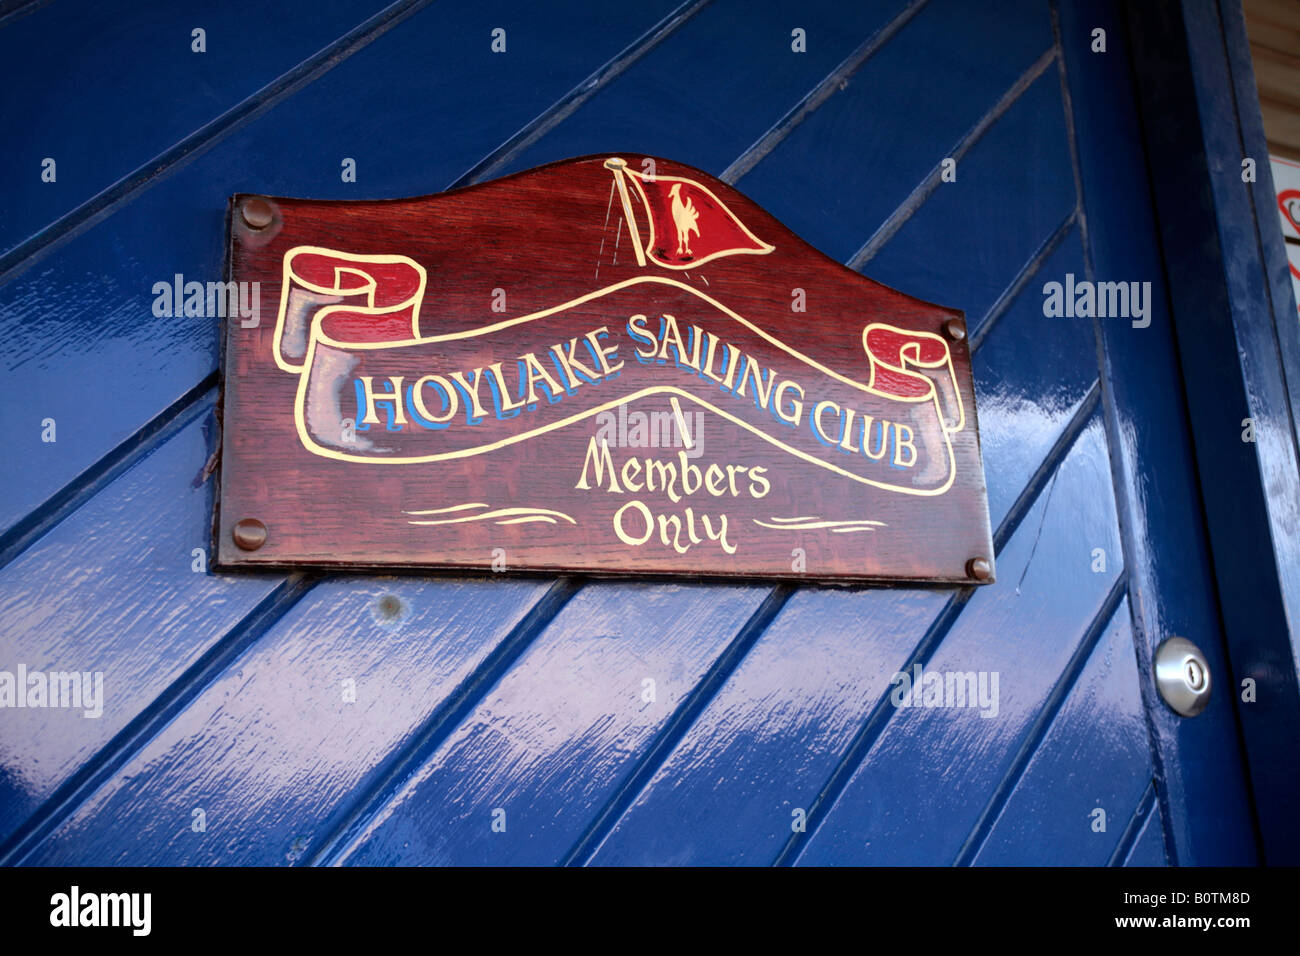 This image shows detail of the clubhouse sign on the front entrance to Hoyalke Sailing Club based in the Wirral UK. Stock Photo